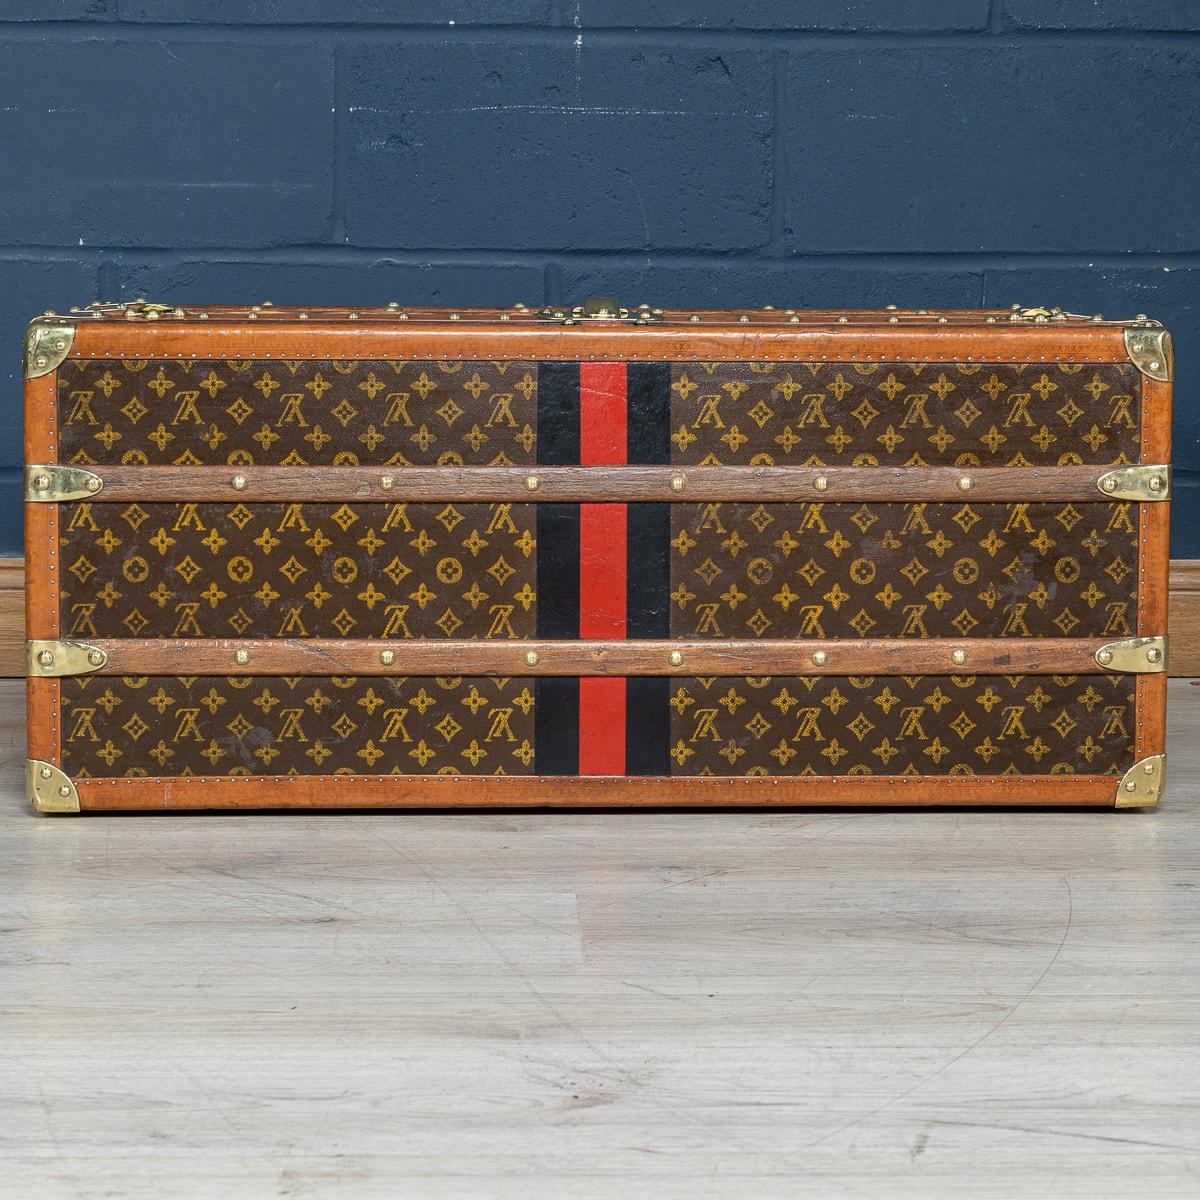 20th Century Louis Vuitton Shoe Trunk, France c.1930 In Good Condition For Sale In Royal Tunbridge Wells, Kent